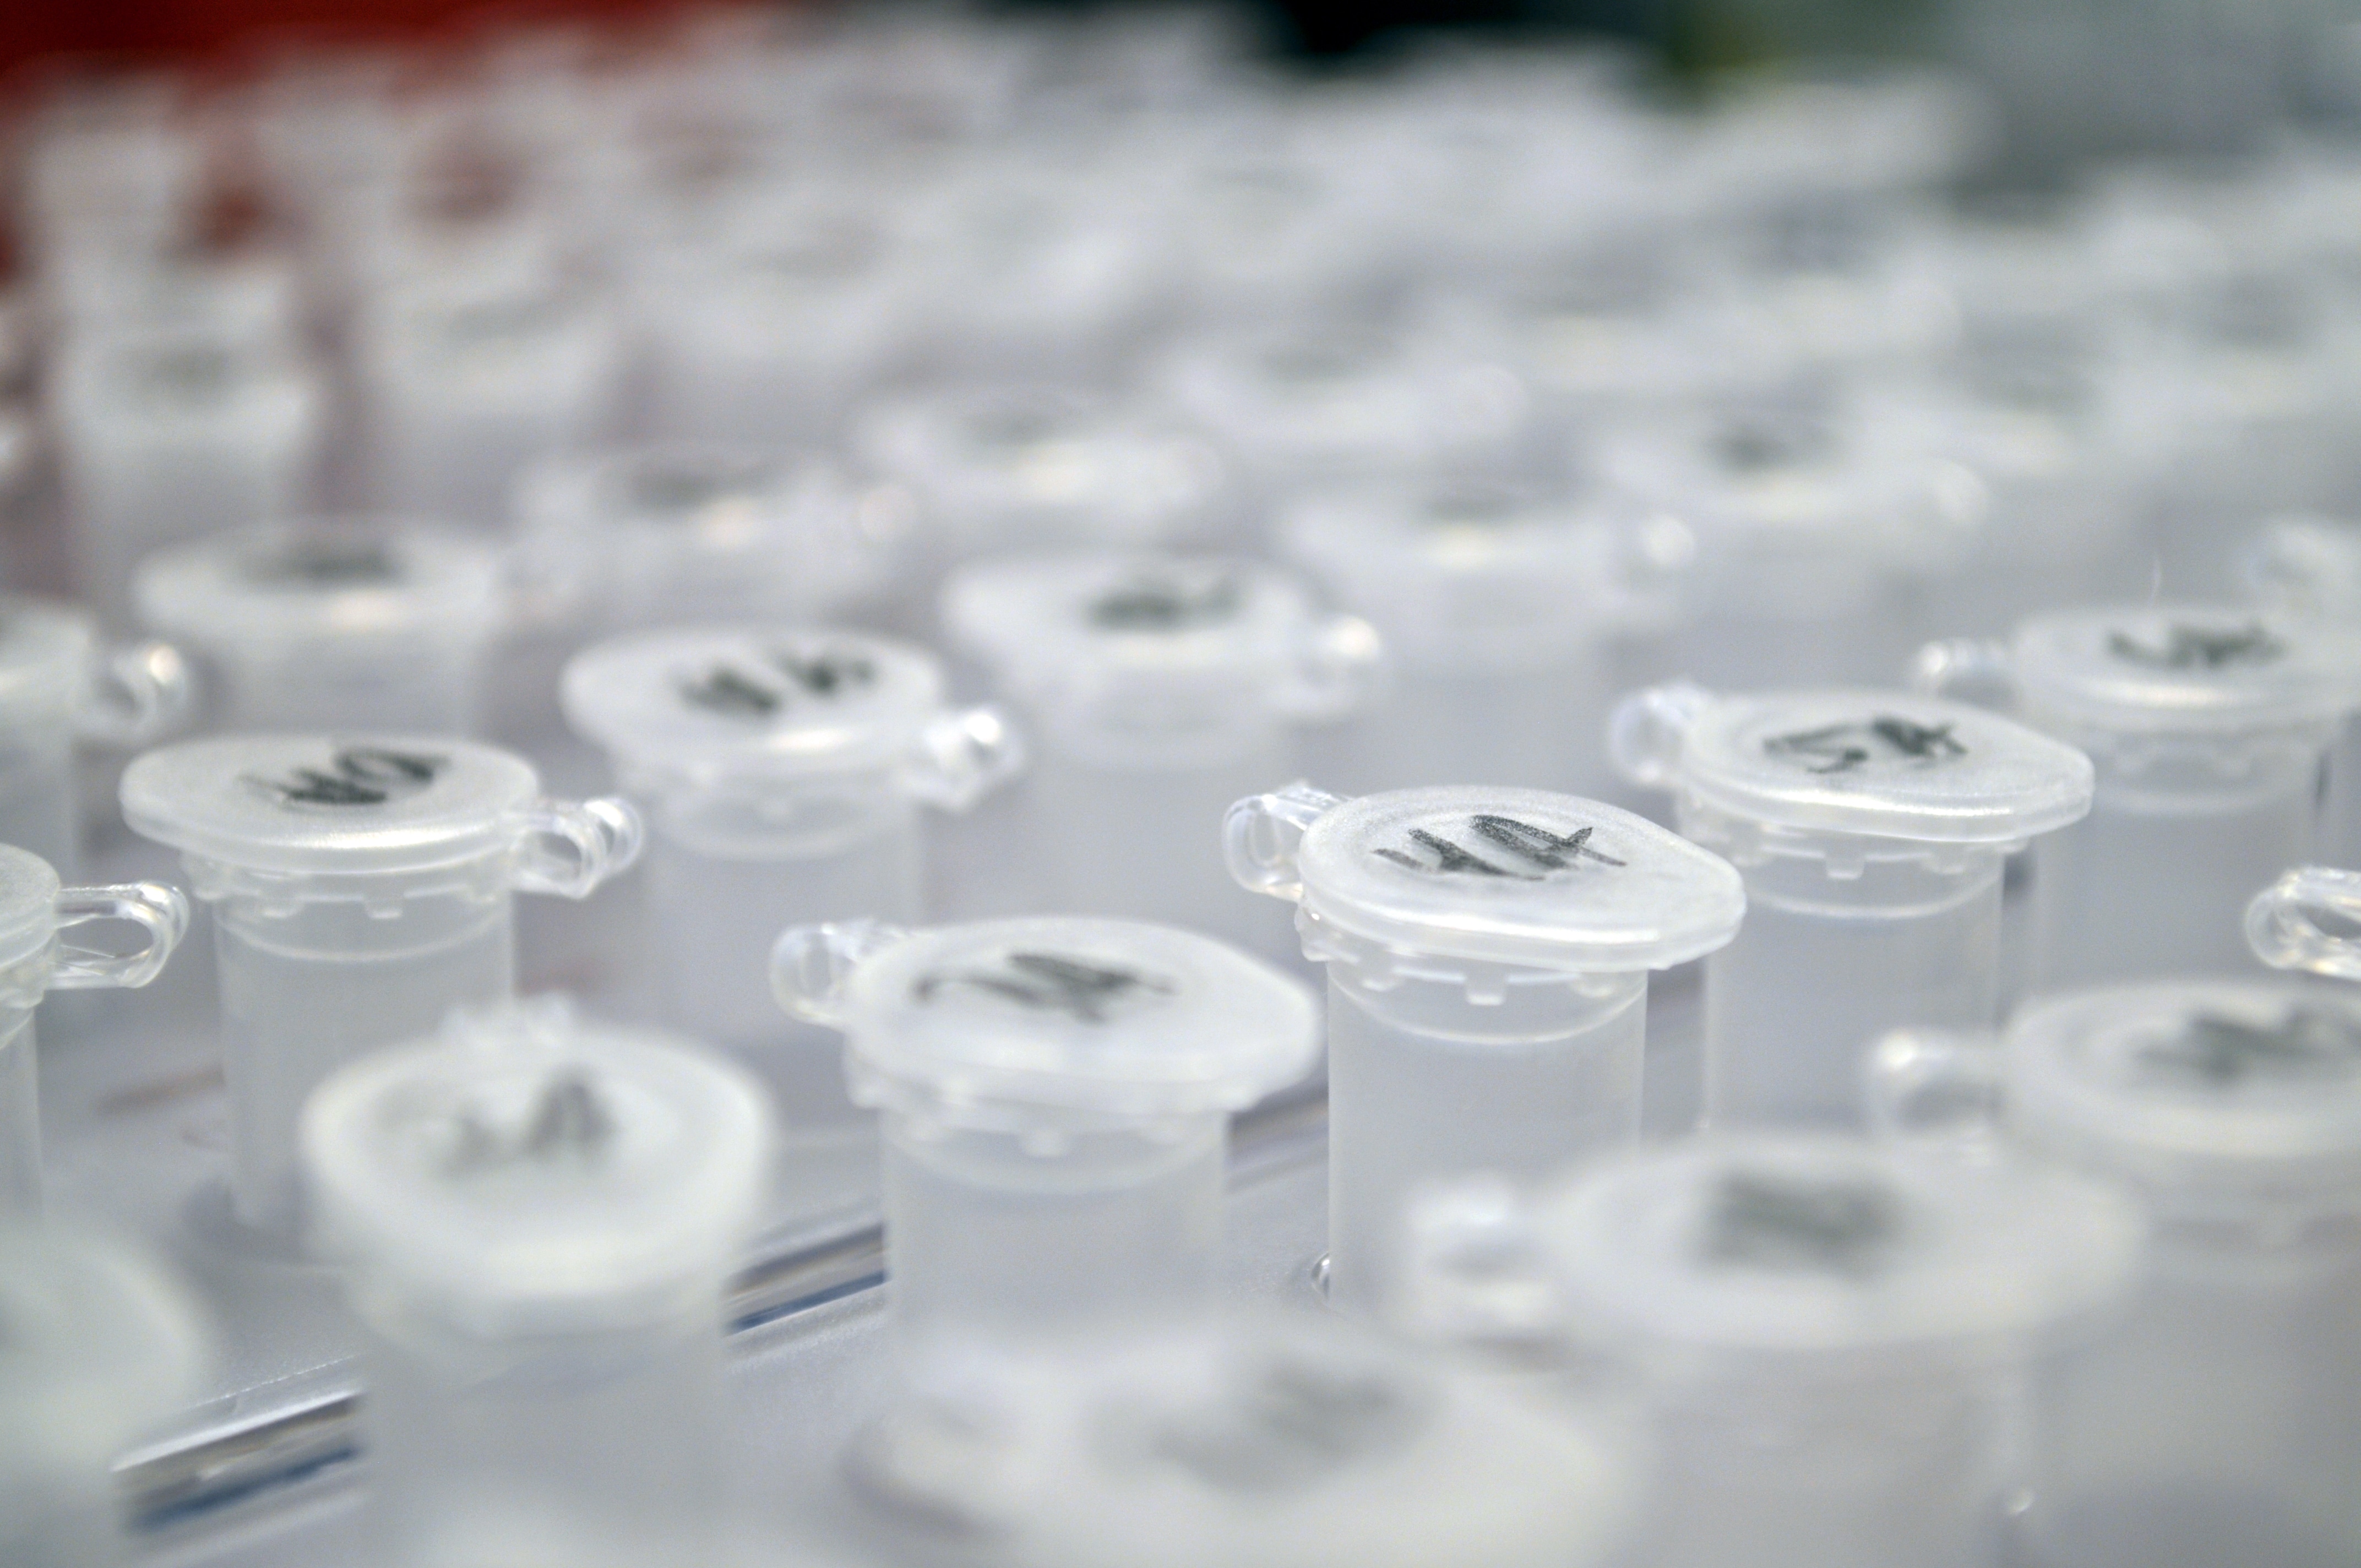 Image of sample tubes for rare disease research